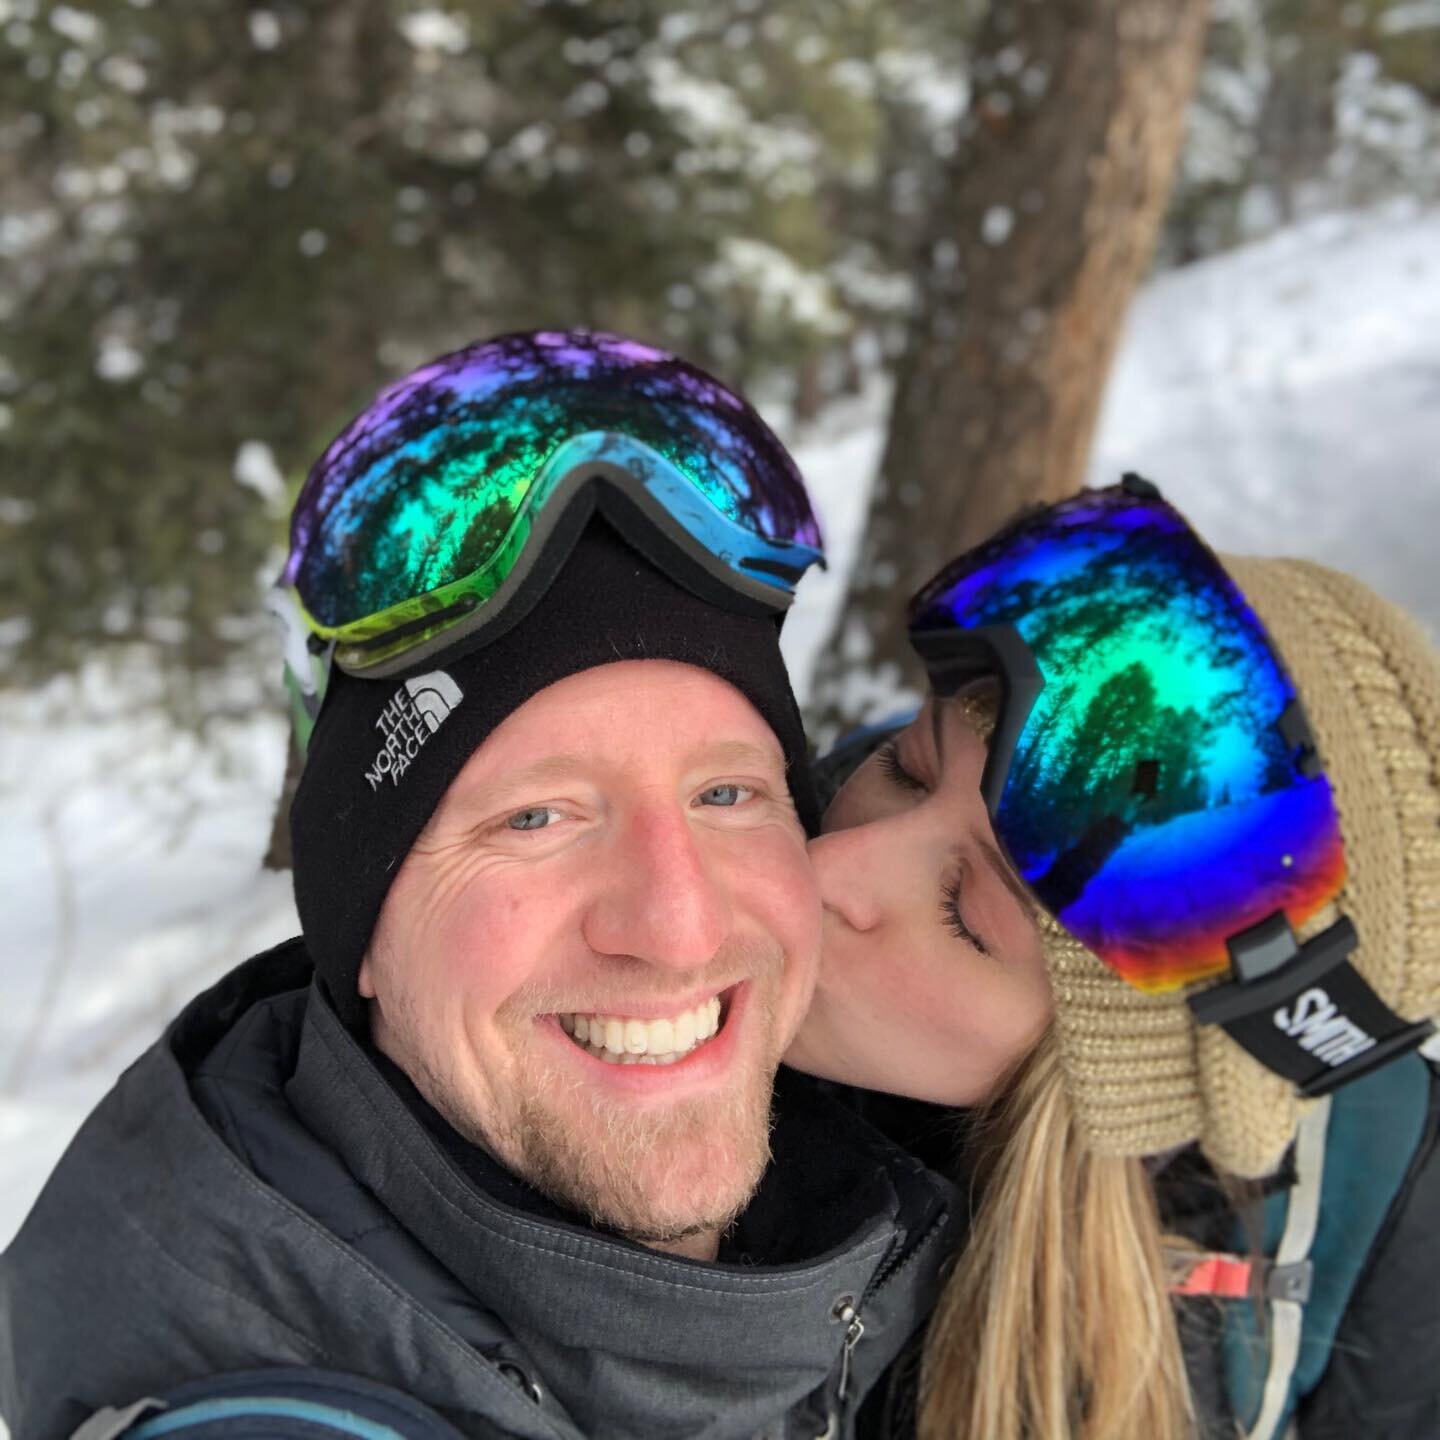 Happy Valentine&rsquo;s Day! Whether you celebrate this day or not, I hope you have a day full of joy and happiness! 🥰
⠀⠀⠀⠀⠀⠀⠀⠀⠀
We normally would be out snowshoeing or something but with the windchill being well below zero, we decided to do a mini-